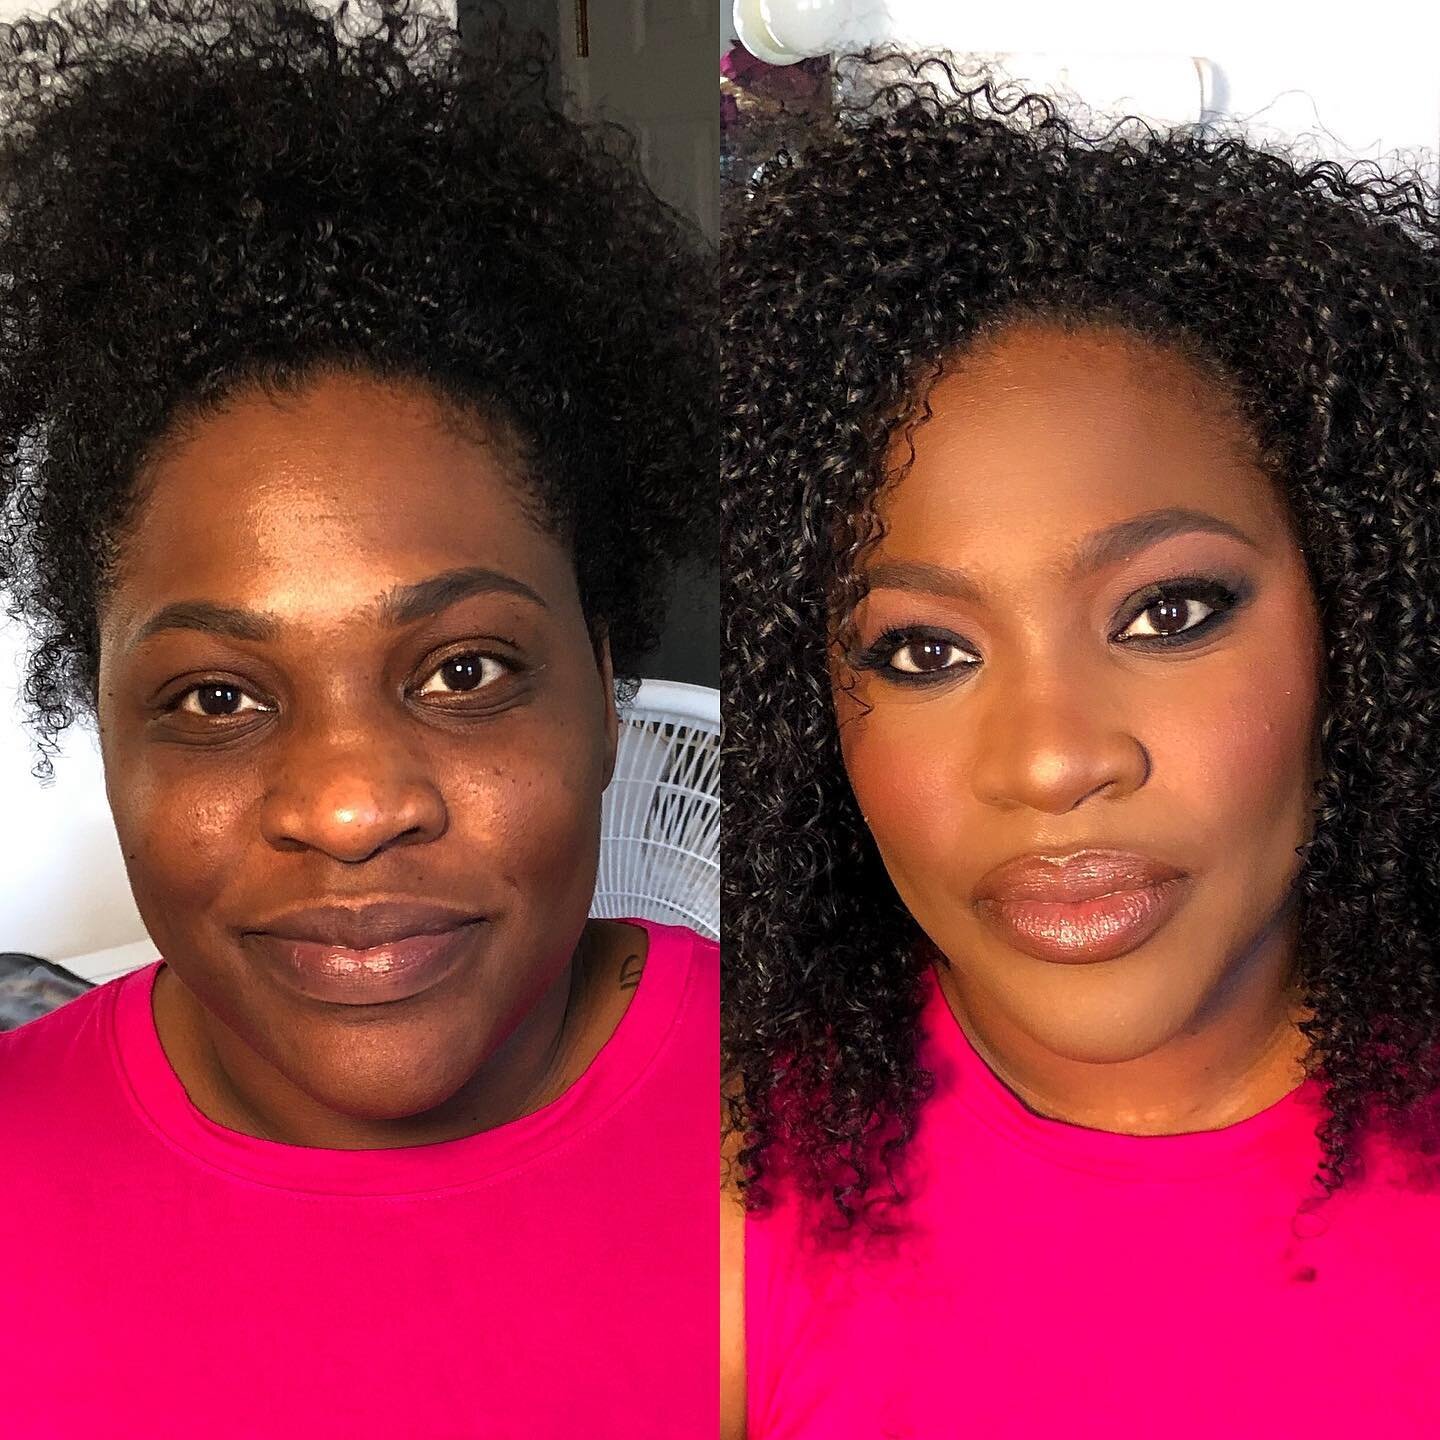 A little before and after on this rainy Thursday afternoon 😊 (makeup only, can&rsquo;t take credit for that perf hair 👌🏼)
.
.
.
.
.
.
.
.
.
.
.
.
.
.
.
.
.
.
.
.
.

#nashvillemakeupartist#nashvillemakeup#nashvillemua#nashvillehair#nashvillehairsty